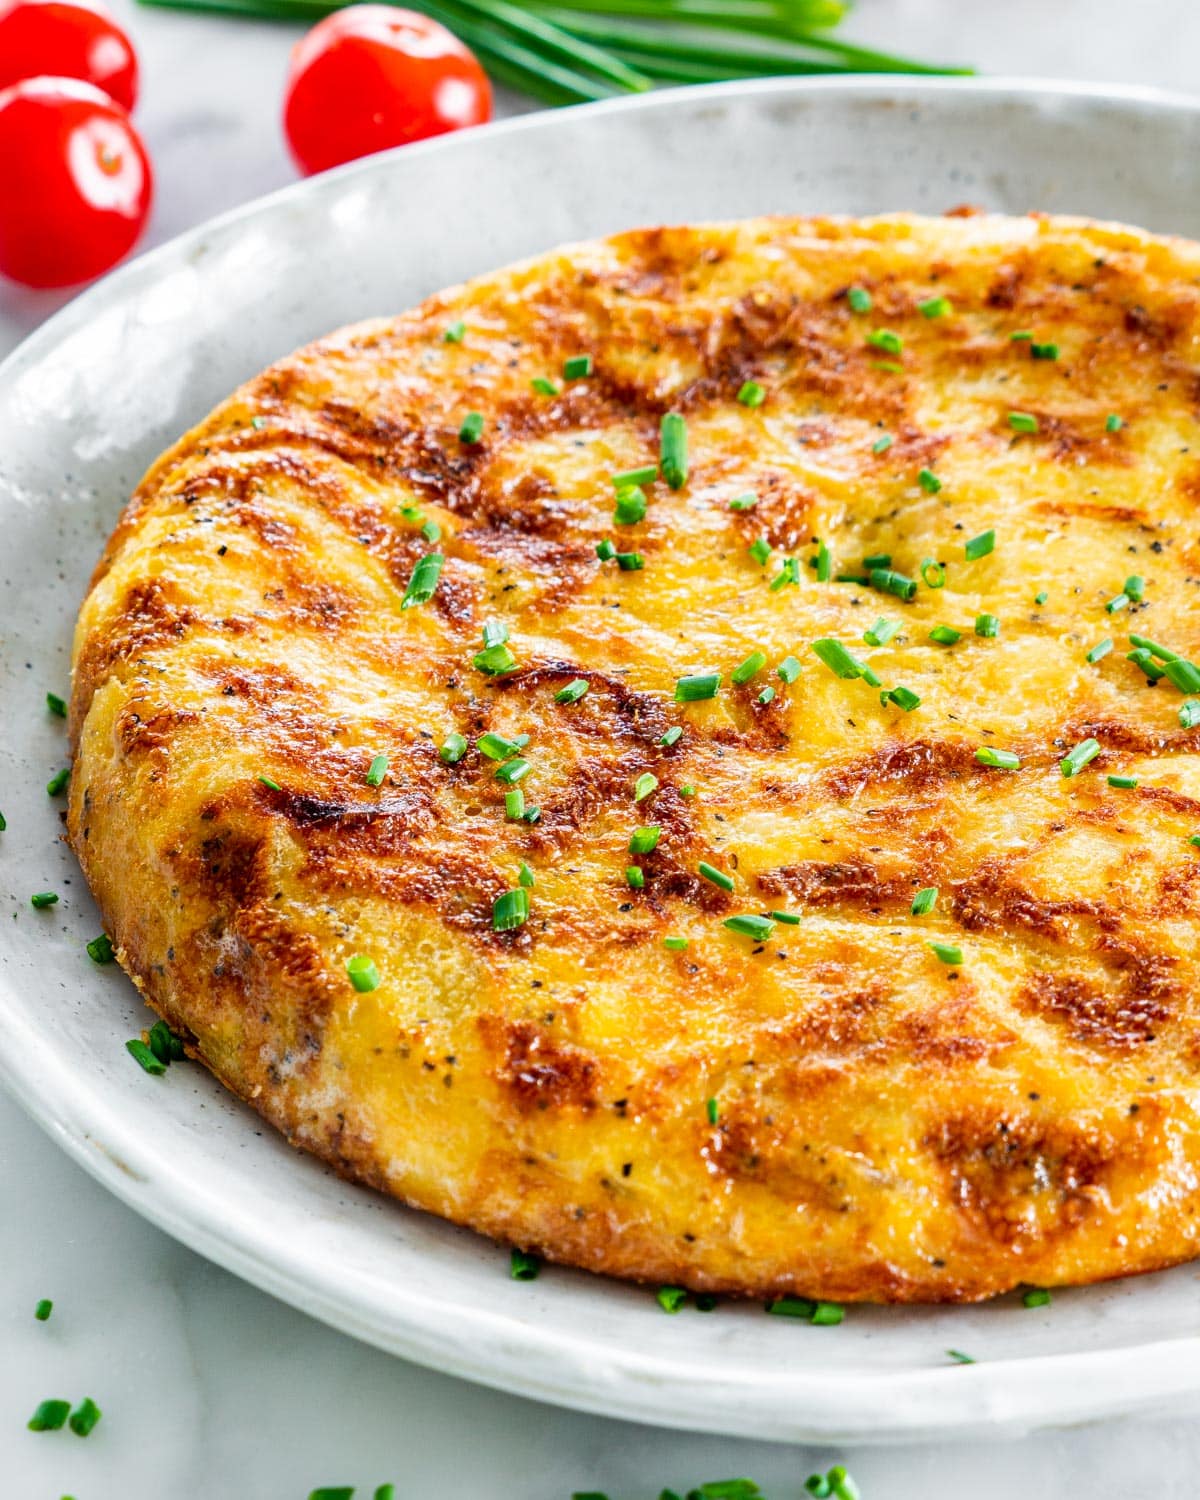 Side view of a complete Spanish tortilla on a gray plate garnished with chives